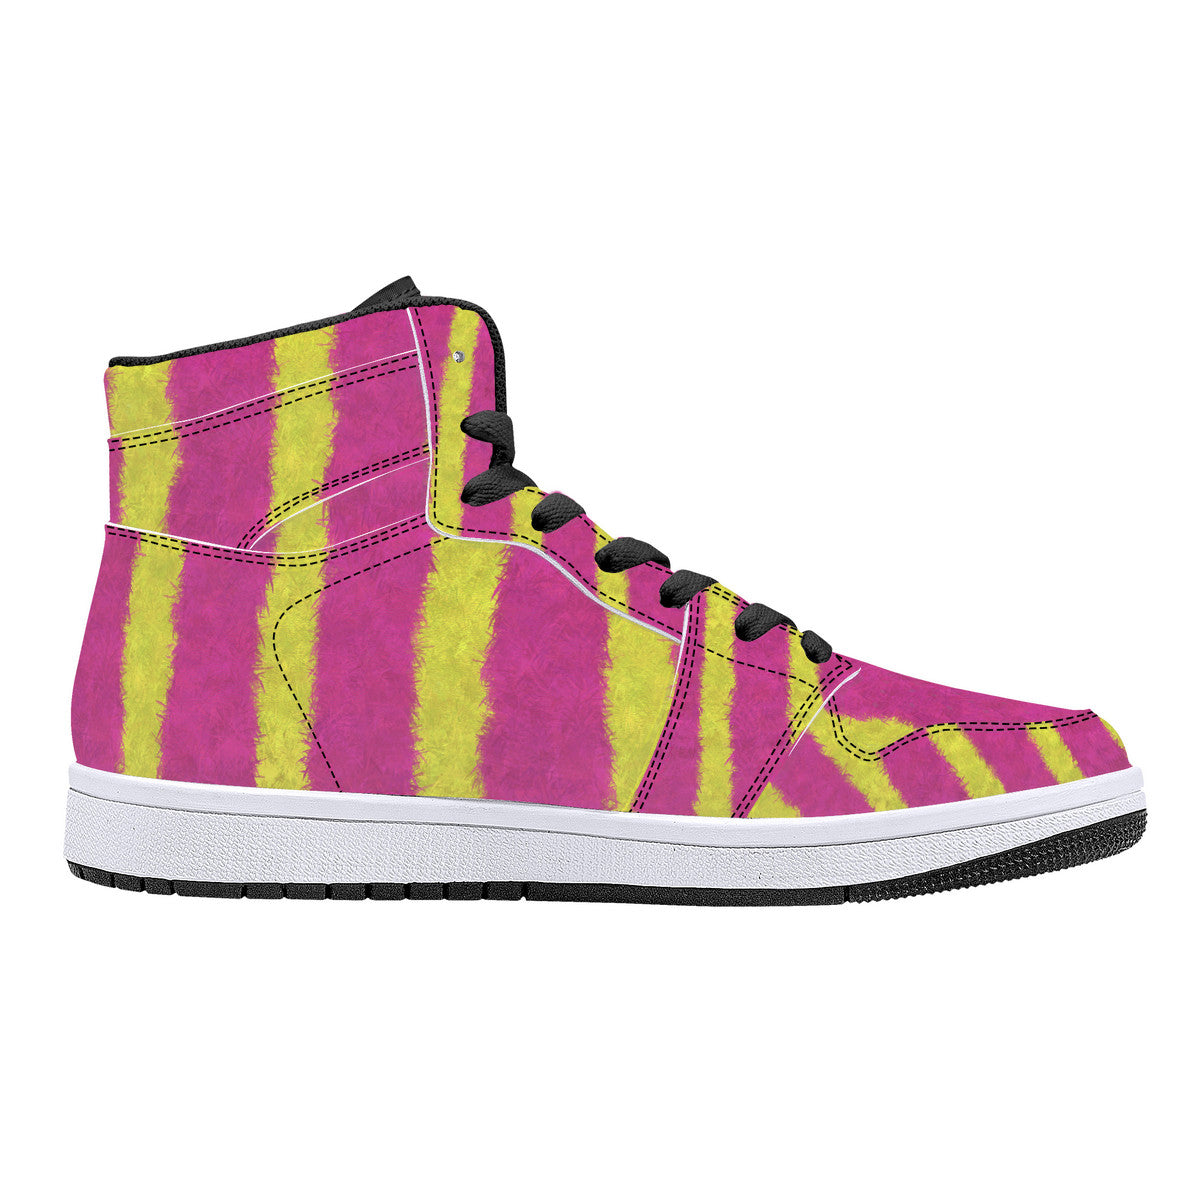 "Plume" High-Top Synthetic Leather Sneakers